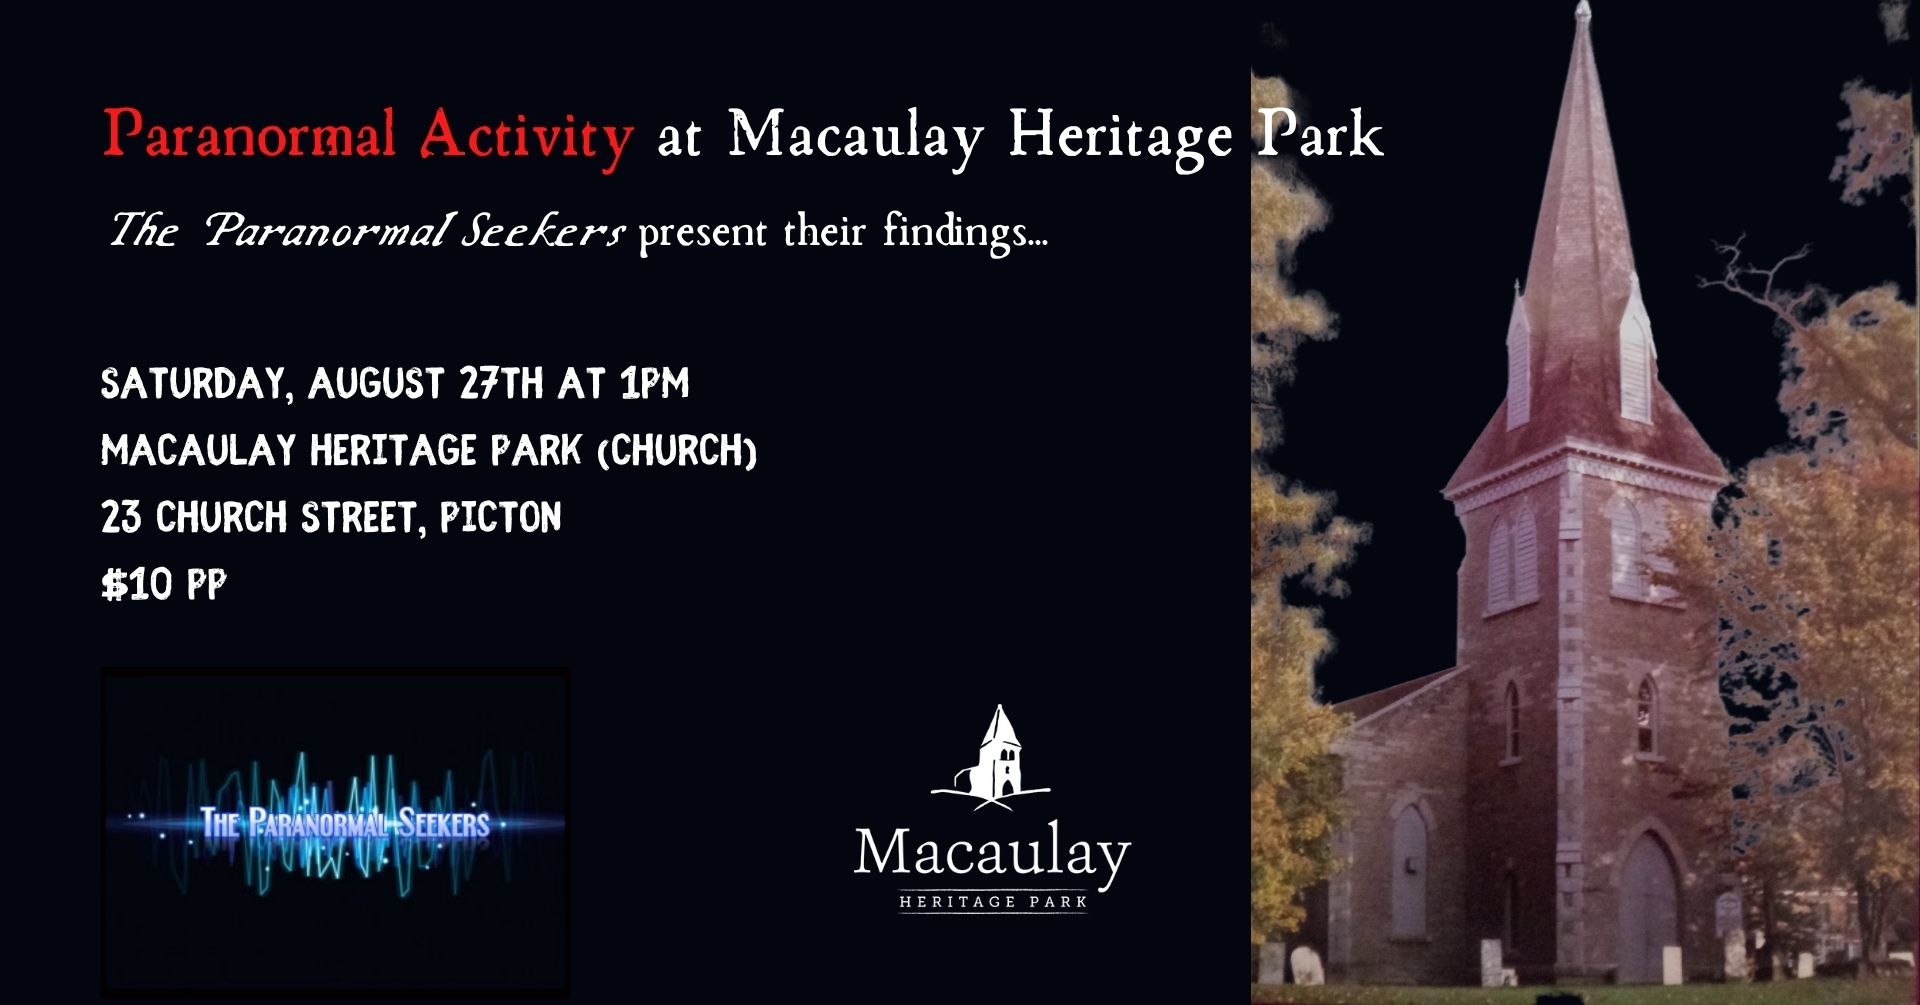 Paranormal Activity at Macaulay Heritage Park: The Paranormal Seekers Present Their Findings